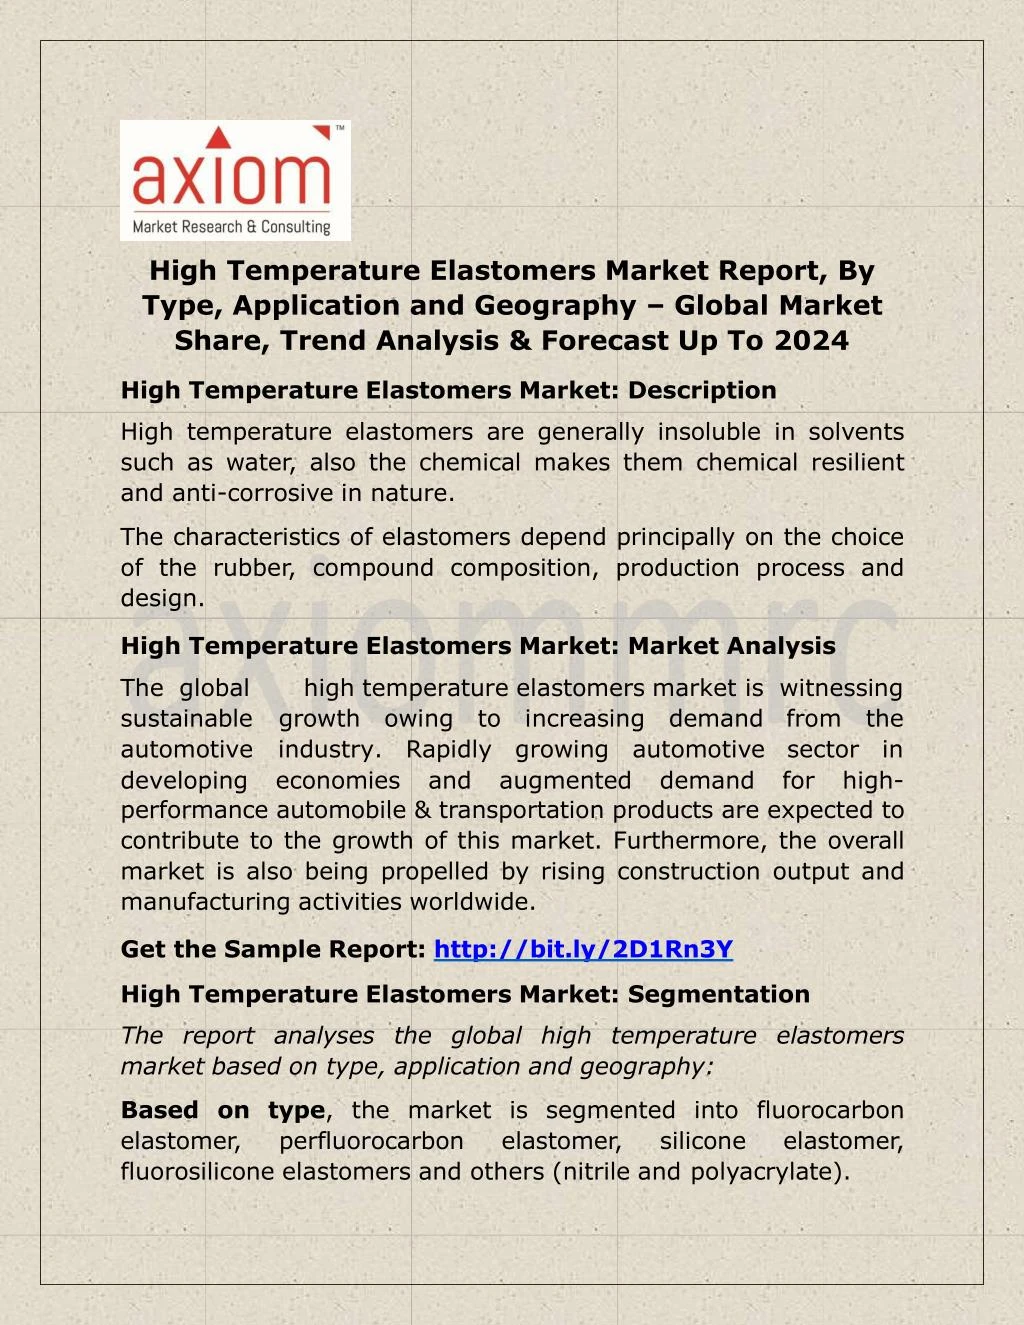 high temperature elastomers market report by type